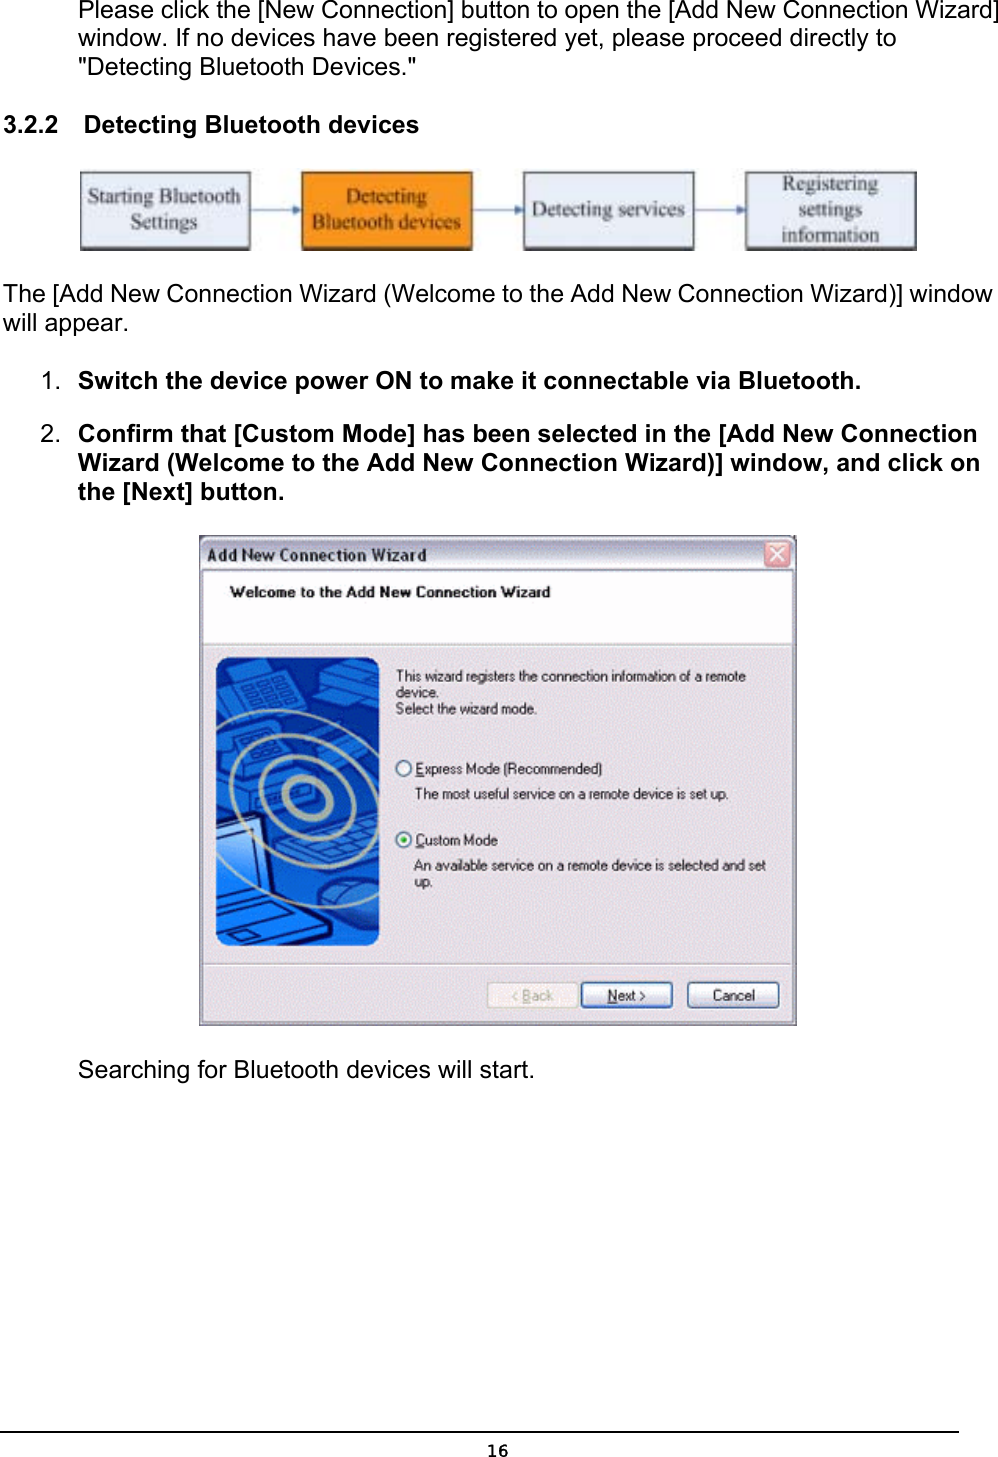  Please click the [New Connection] button to open the [Add New Connection Wizard] window. If no devices have been registered yet, please proceed directly to &quot;Detecting Bluetooth Devices.&quot; 3.2.2  Detecting Bluetooth devices  The [Add New Connection Wizard (Welcome to the Add New Connection Wizard)] window will appear. 1.  Switch the device power ON to make it connectable via Bluetooth. 2.  Confirm that [Custom Mode] has been selected in the [Add New Connection Wizard (Welcome to the Add New Connection Wizard)] window, and click on the [Next] button.  Searching for Bluetooth devices will start.  16